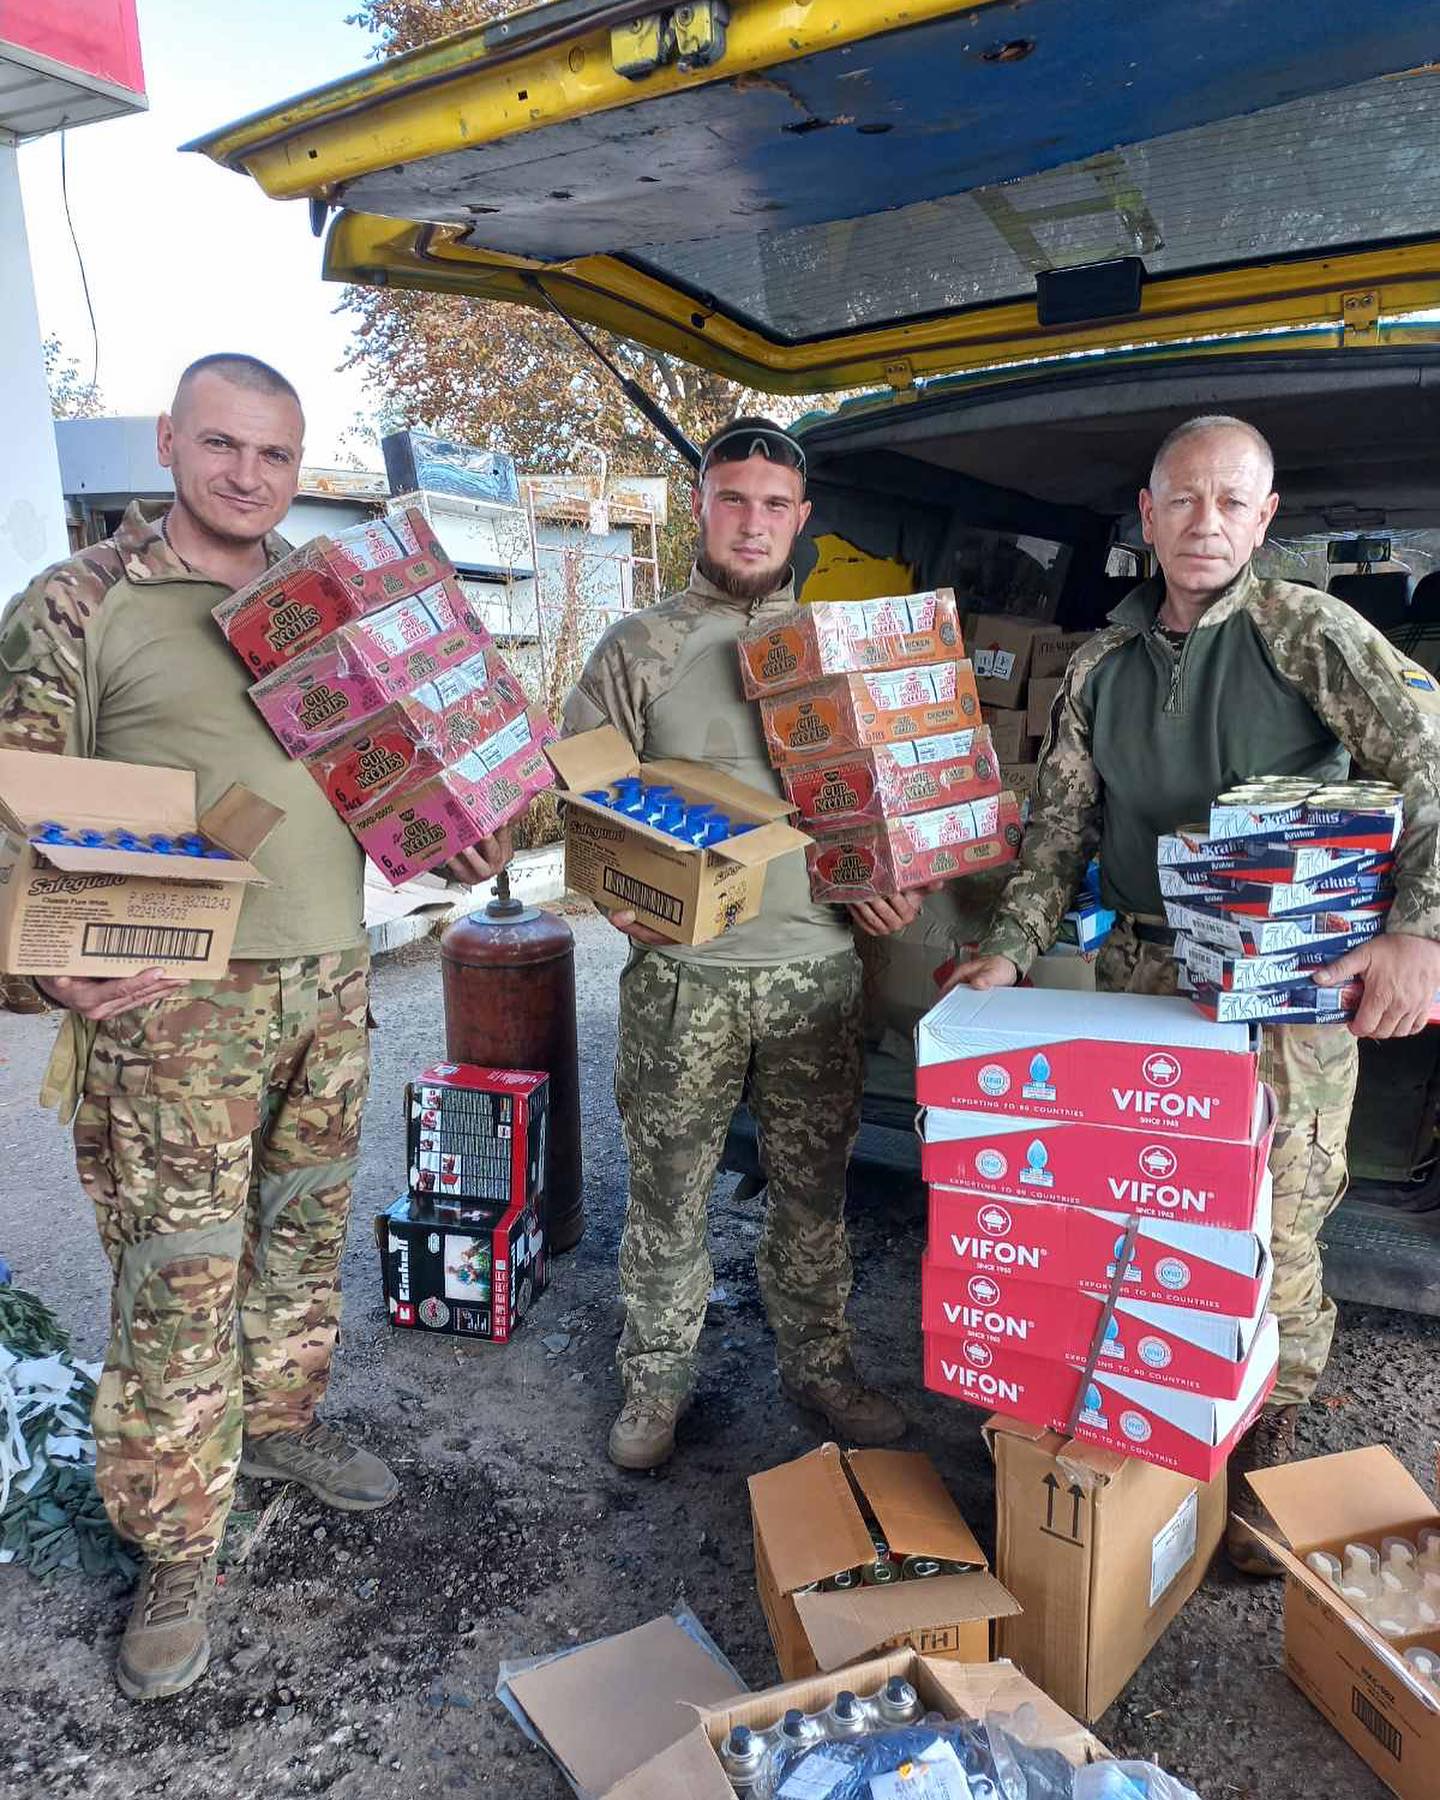 Three men in military uniforms standing next to boxes of food.